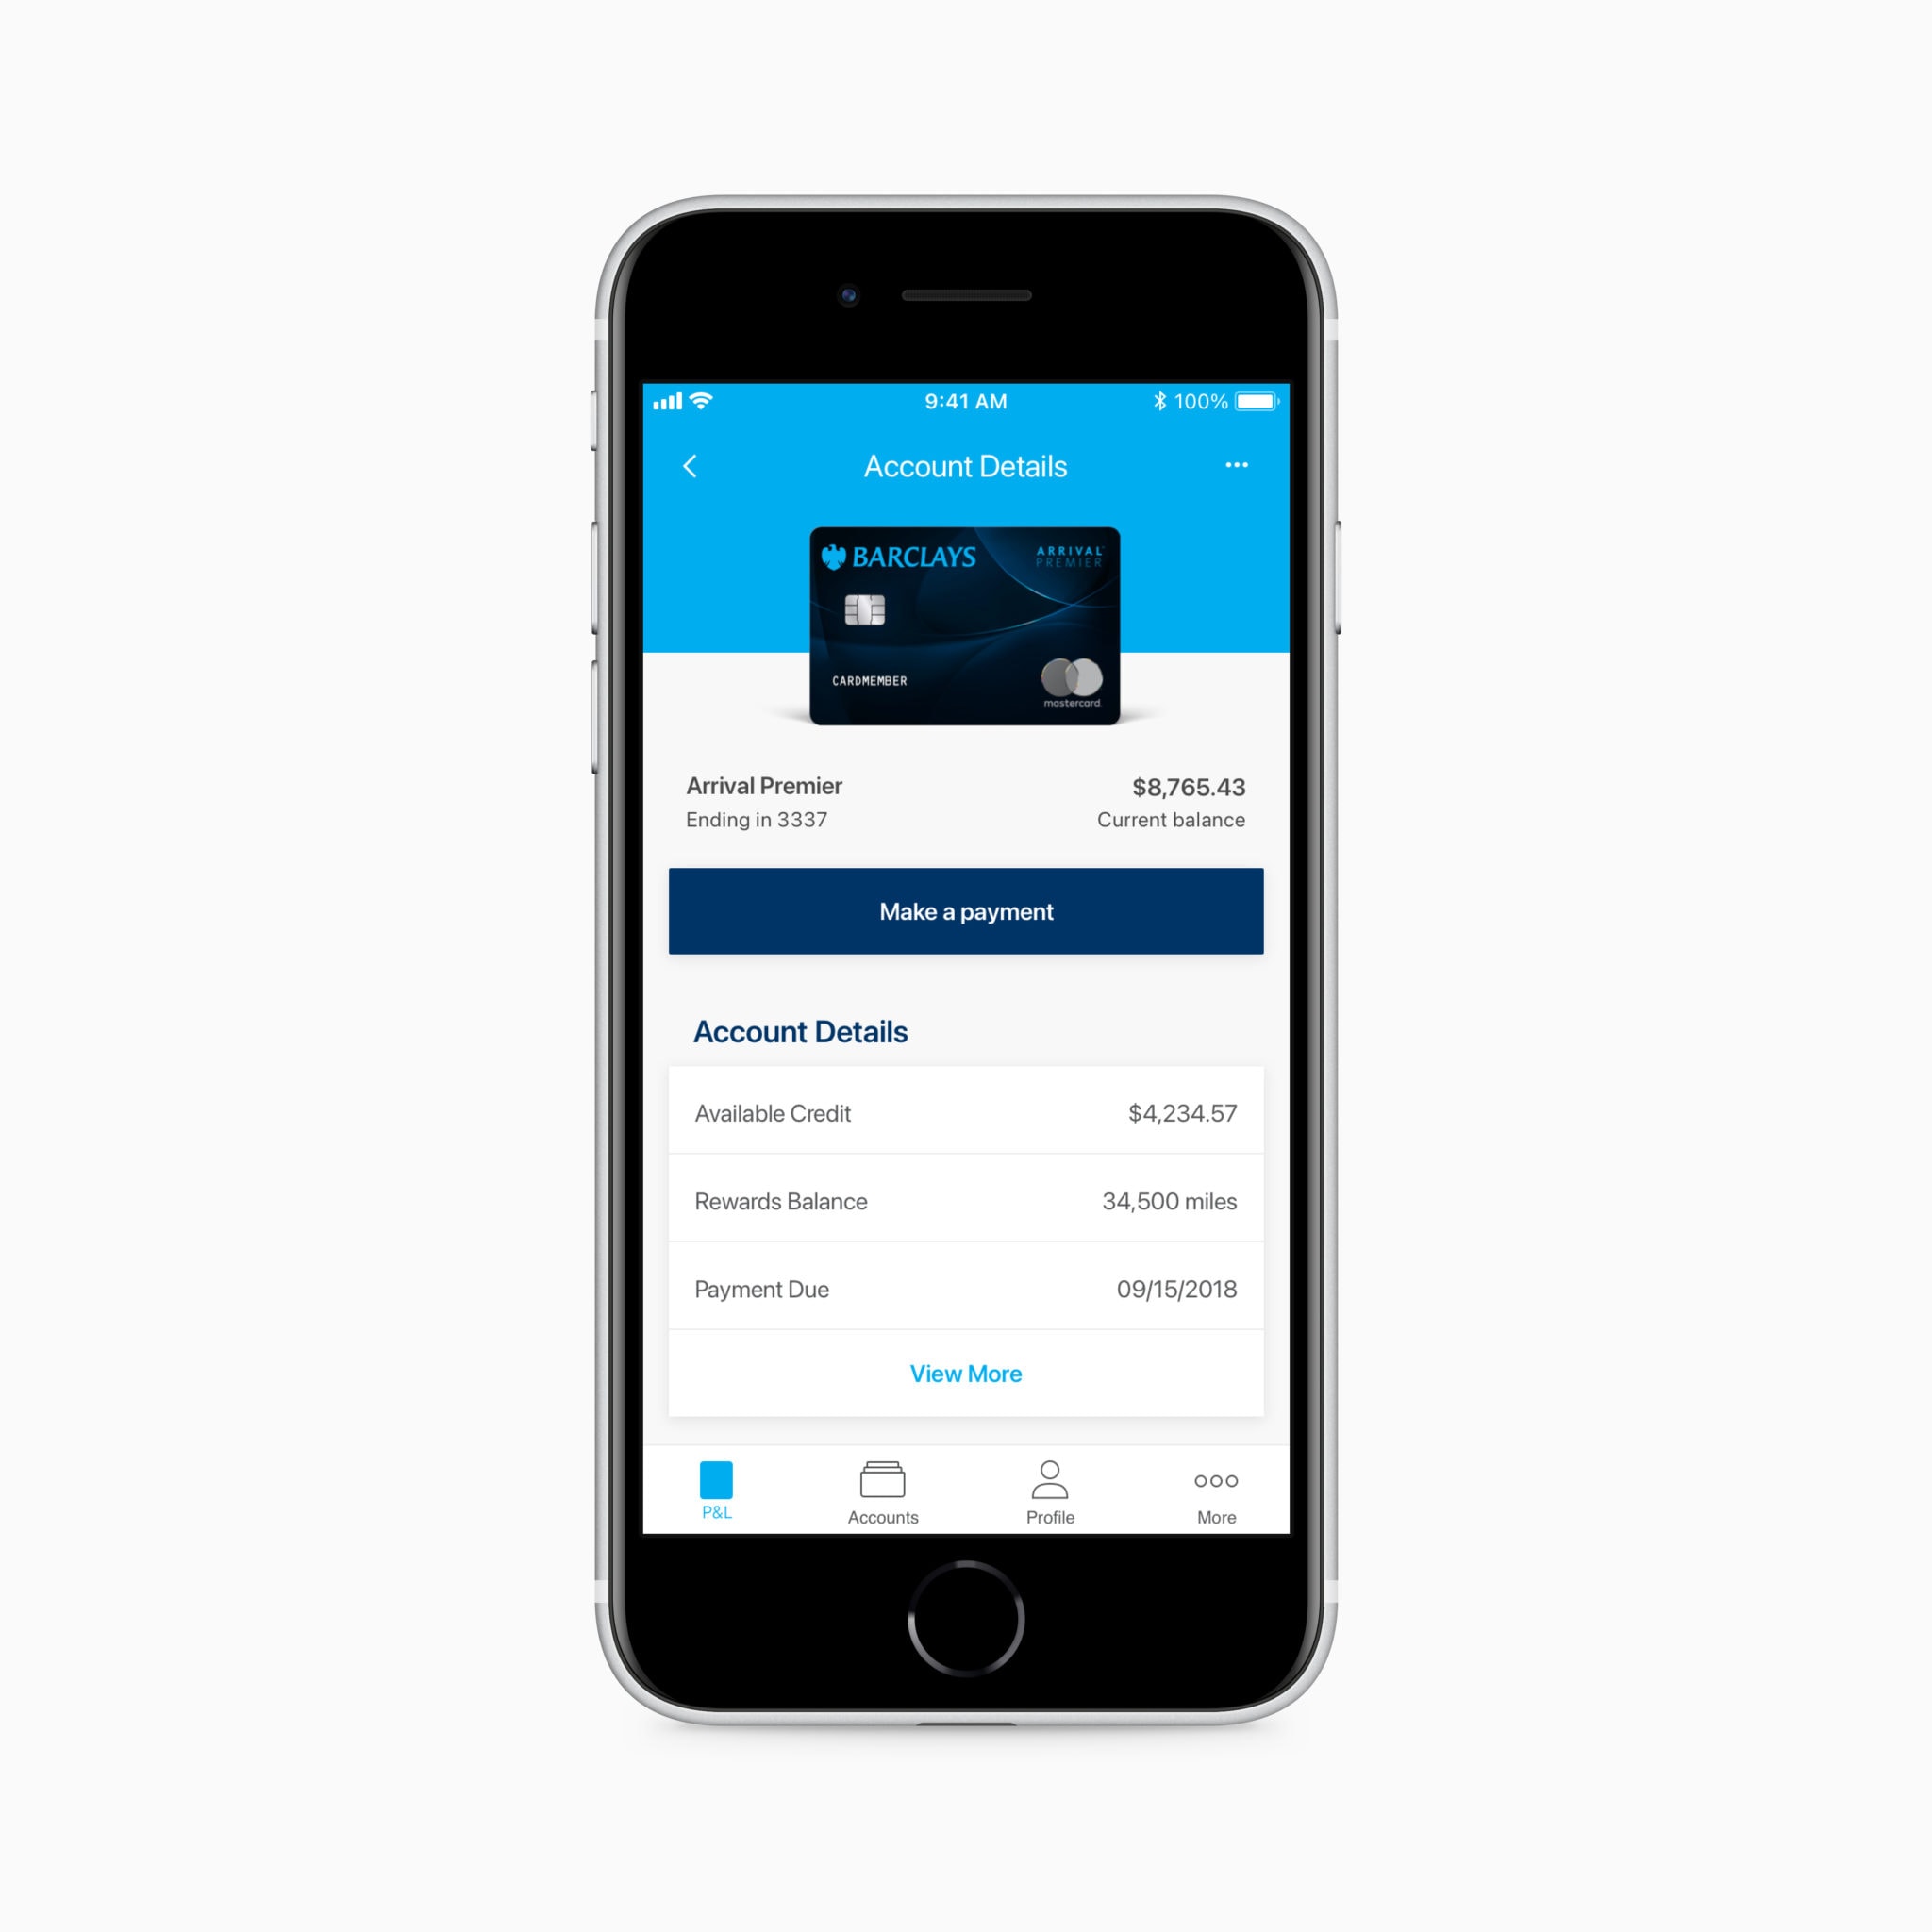 Barclays-Account-Details